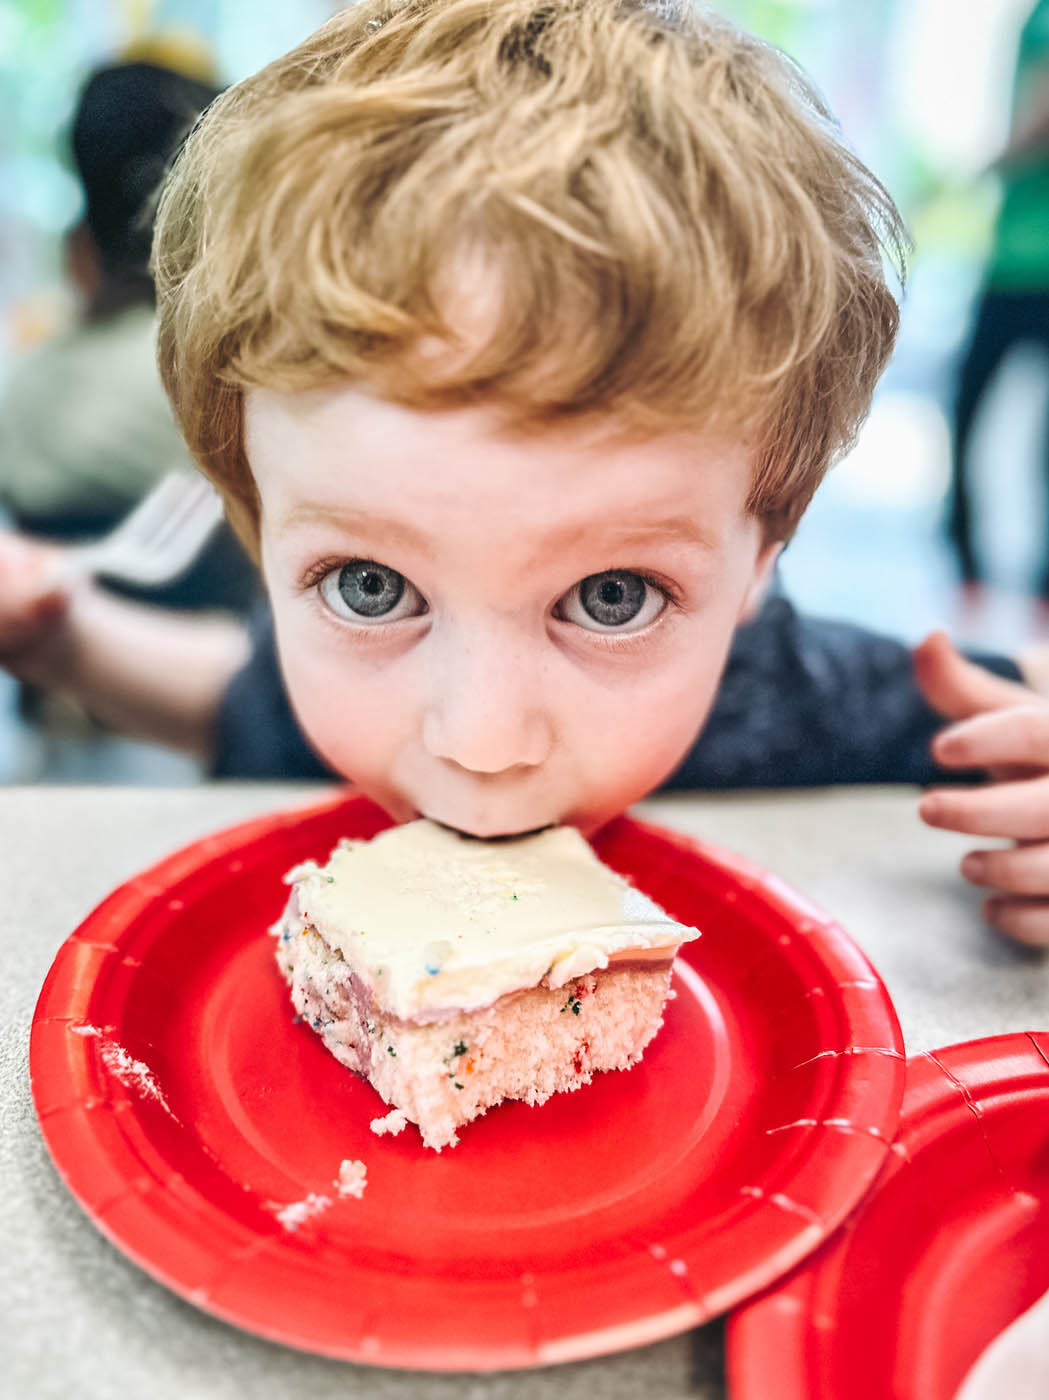 A kid taking a big bite out of a cake piece at Romp n' Roll - a children's party place in Raleigh, NC.